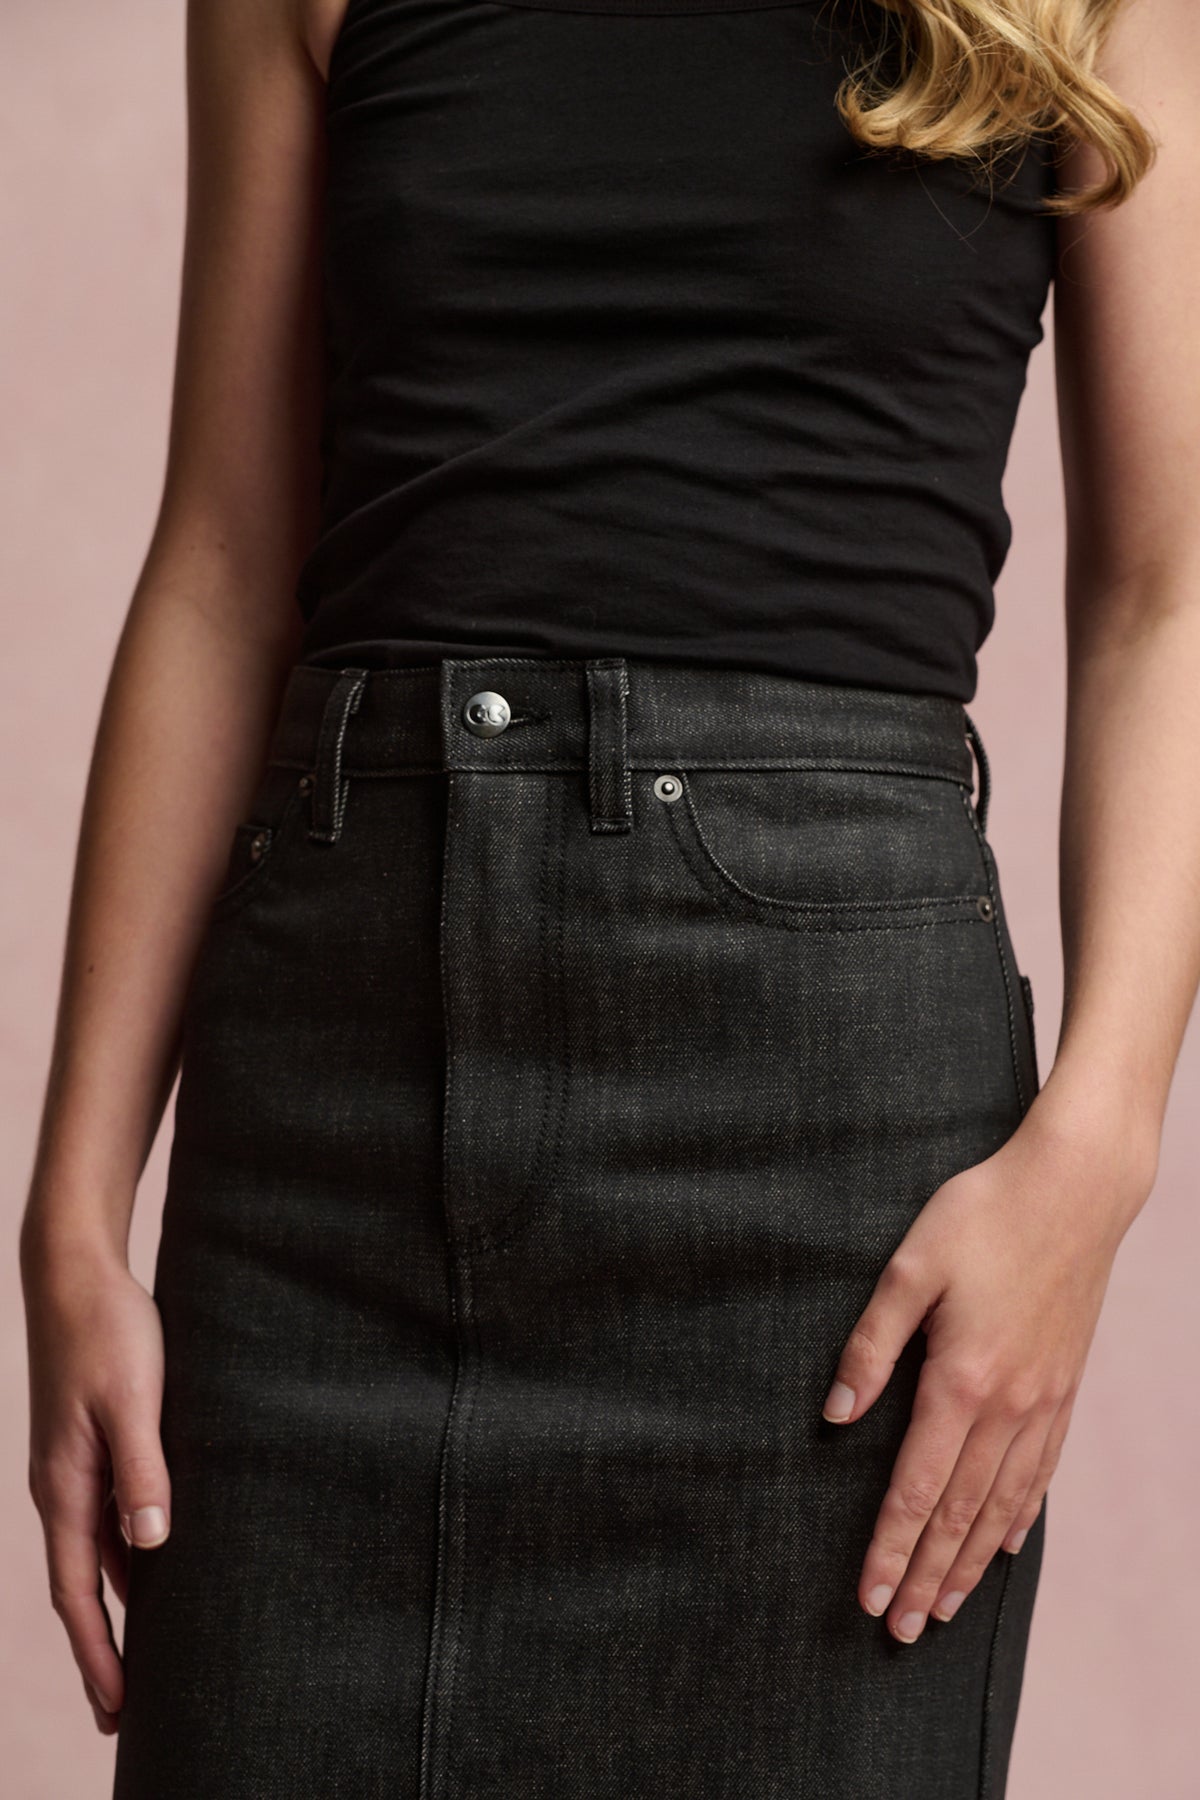 
            Image showing the chest to thigh of blonde female wearing Frankie denim maxi skirt with black camisole tucked in